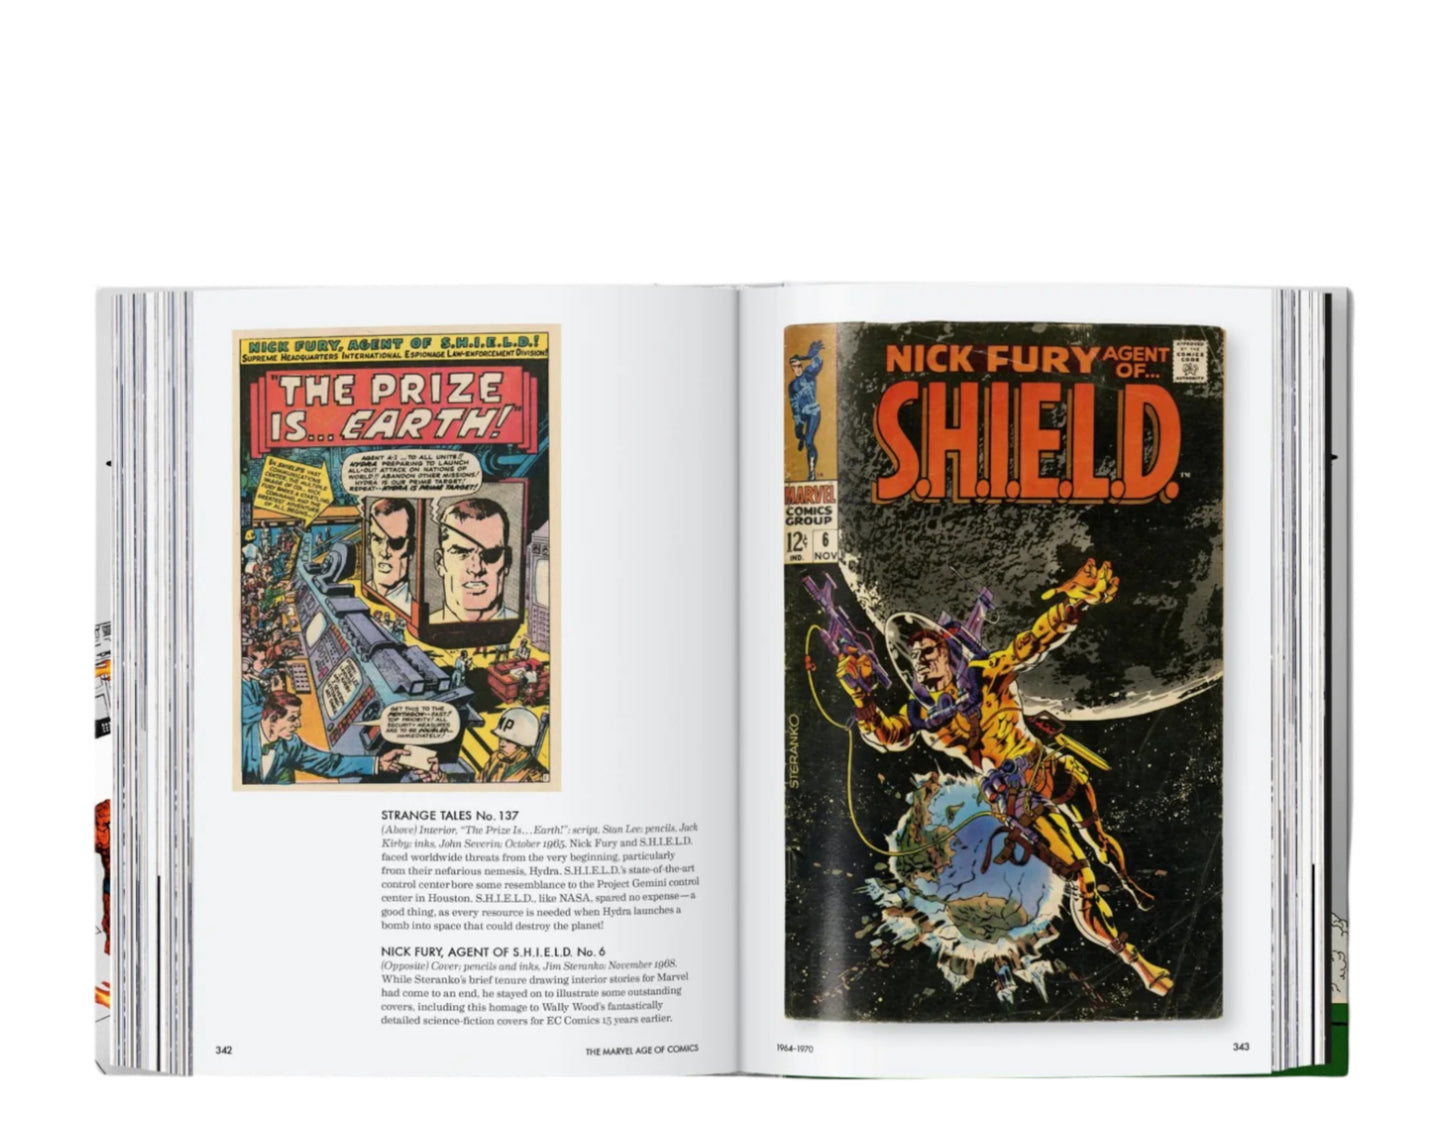 Taschen Books - The Marvel Age of Comics 1961–1978. 40th Anniversary Edition Hardcover Book